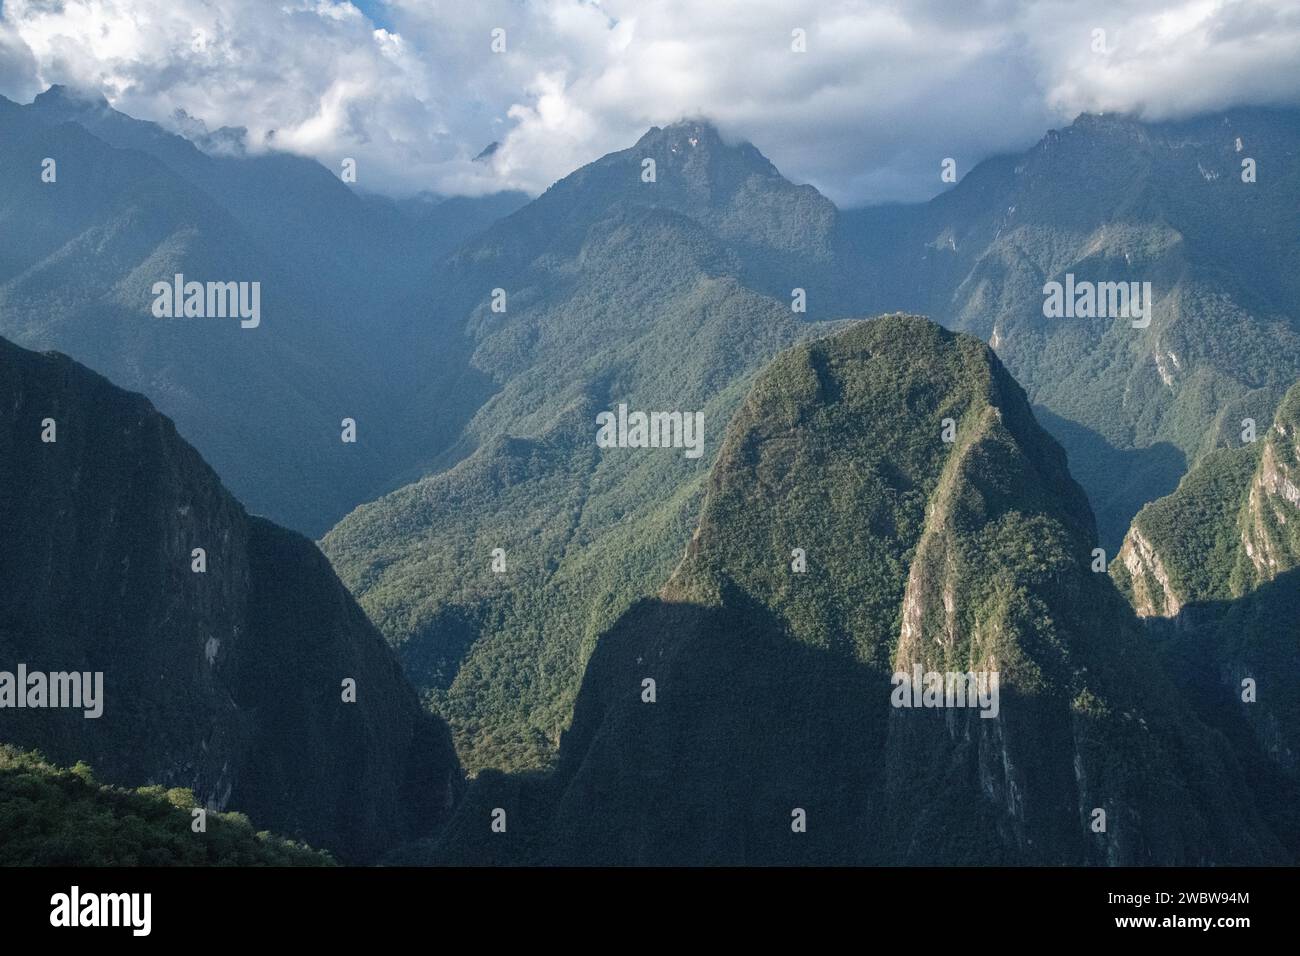 A view from the Machu Picchu citadel ruins of the Sacred Valley mountains in Peru Stock Photo